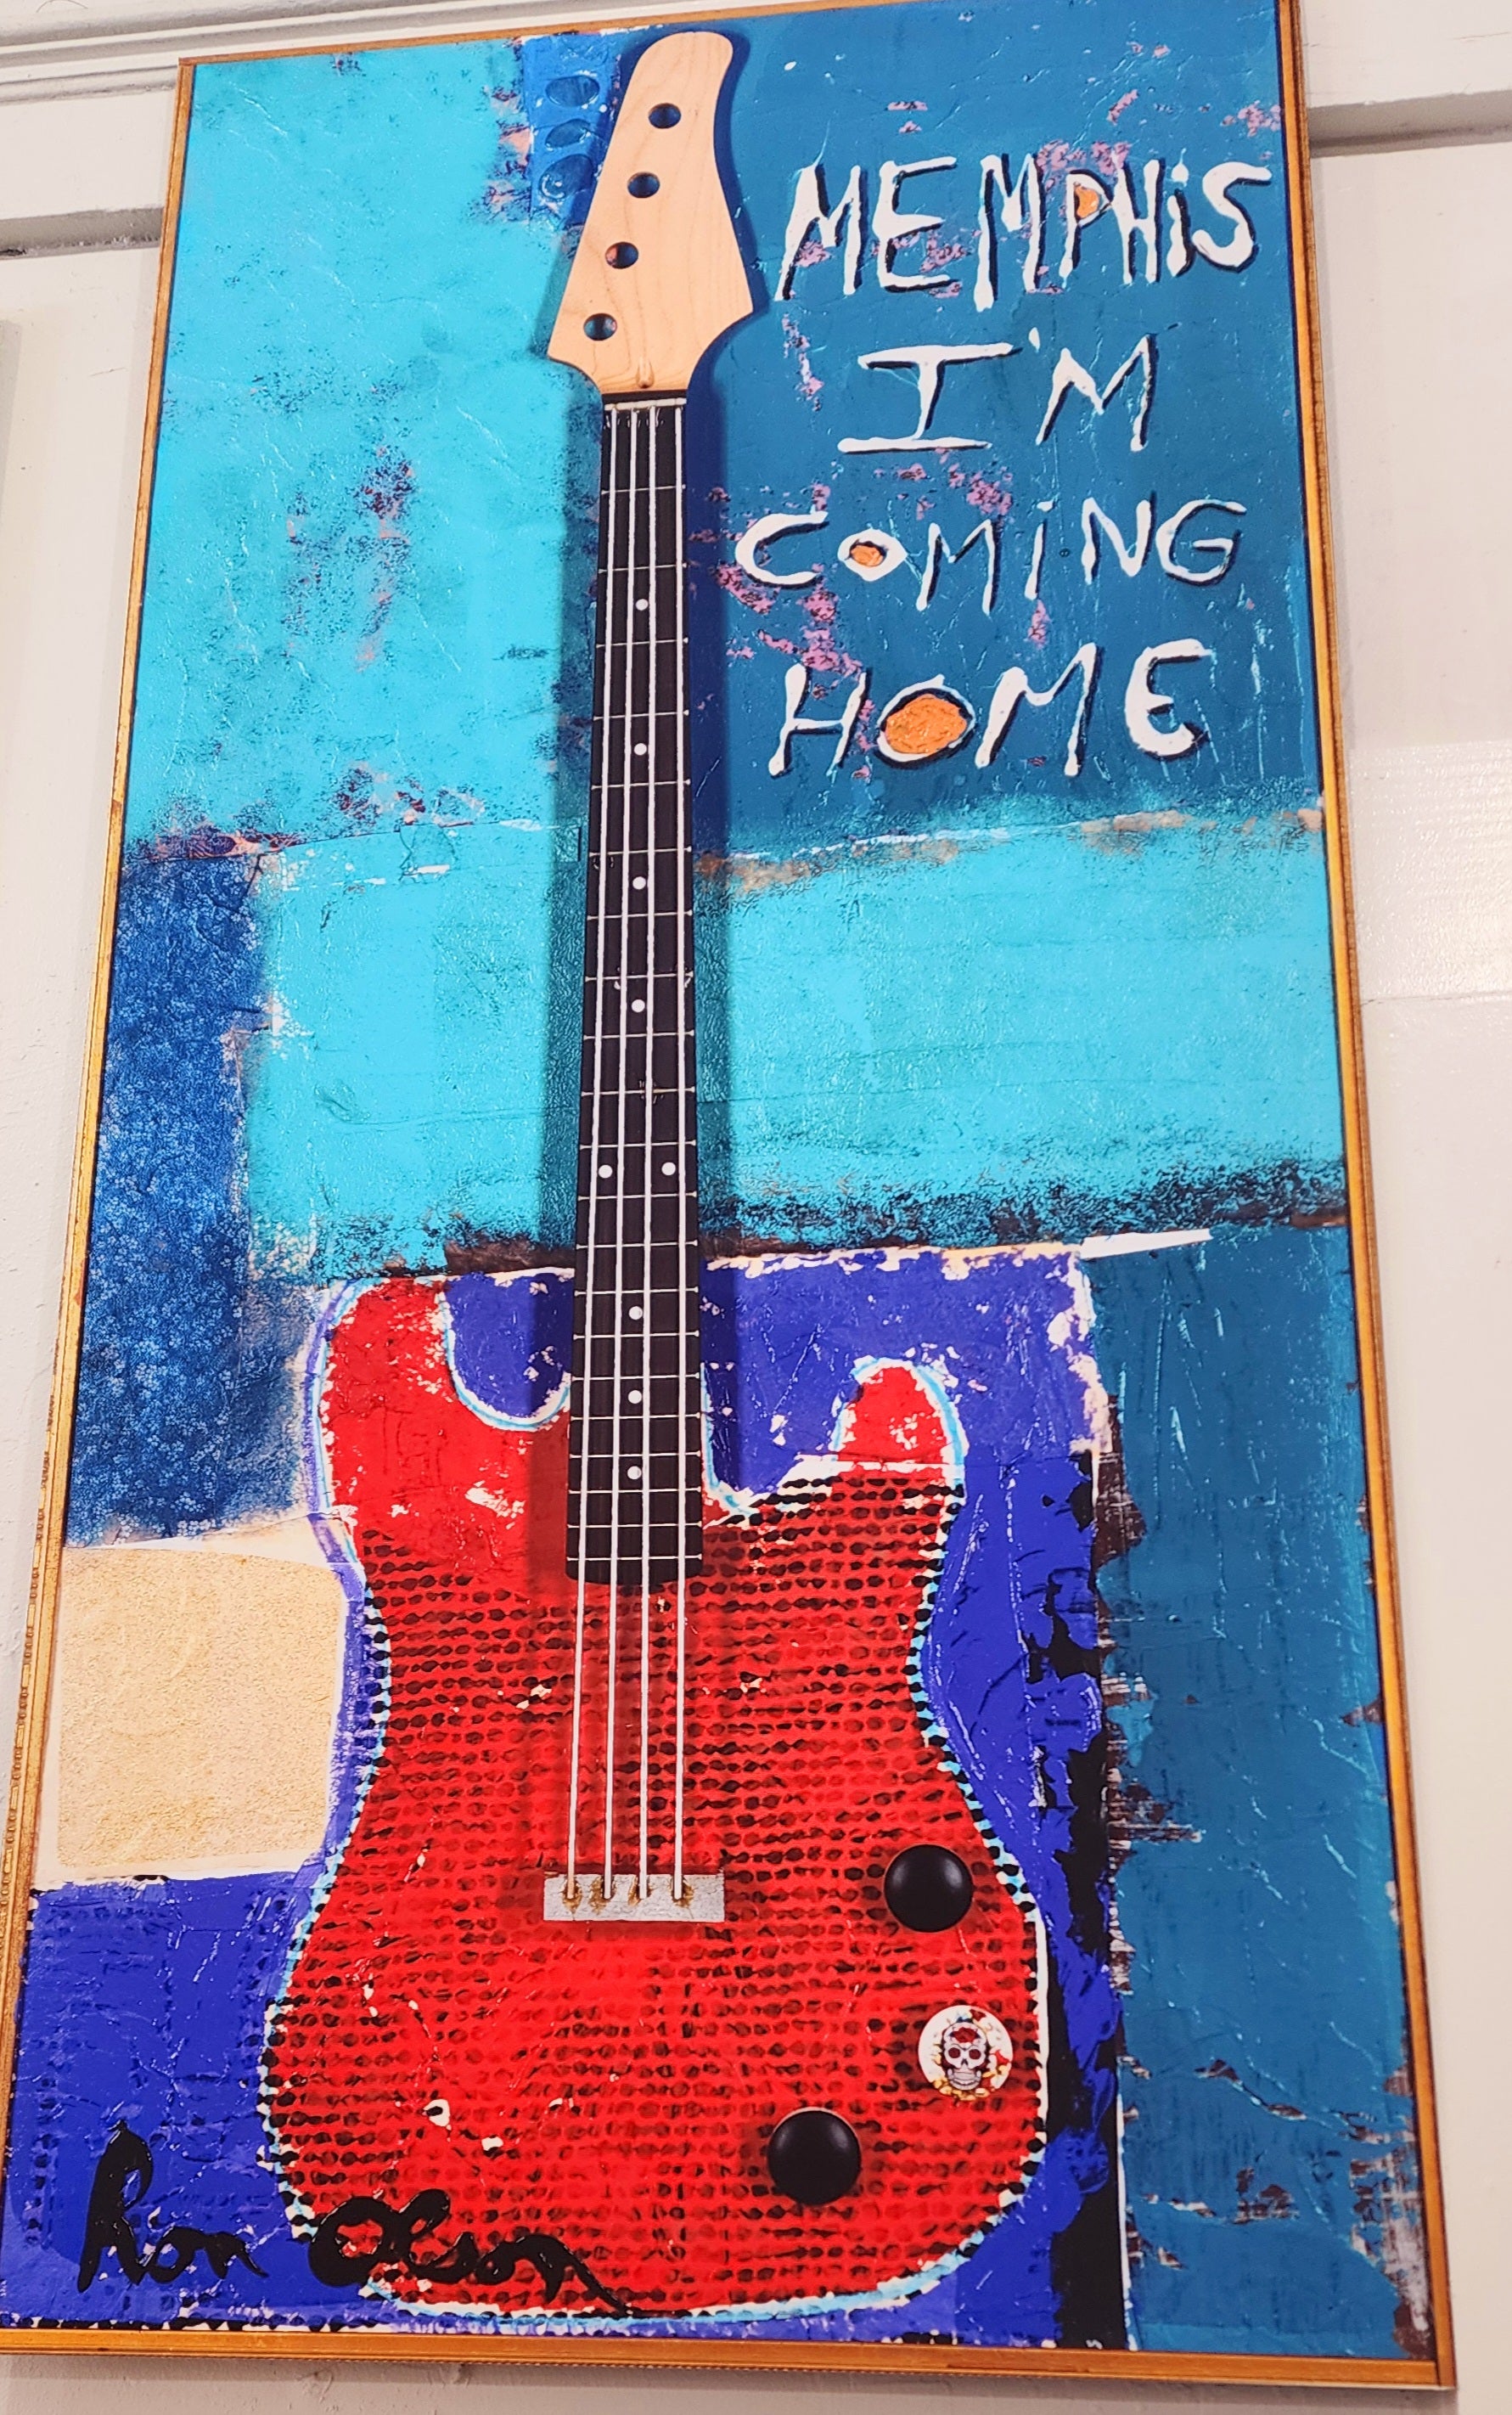 “Memphis, I’m coming home”  Reproduction by Ron Olson